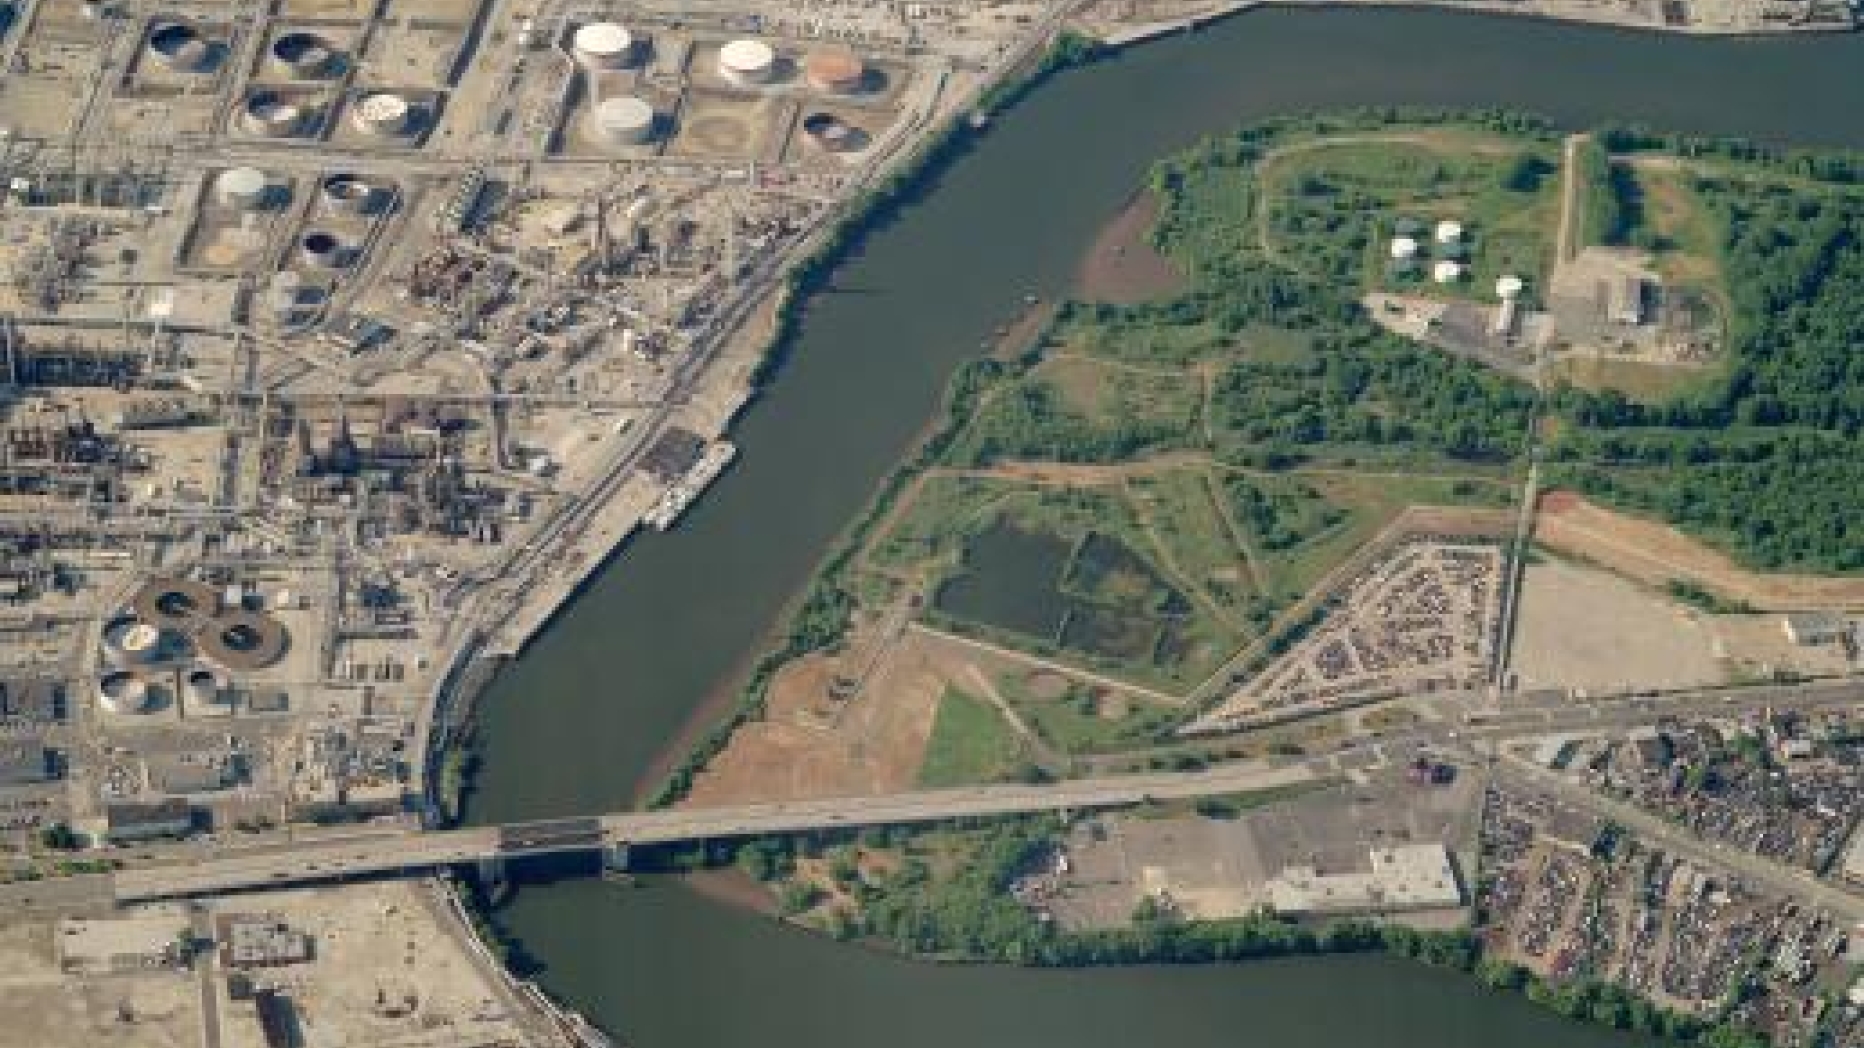 A birds eye view of a section of the Lower Schuylkill area containing an oil refinery and the Passayunk avenue bridge.